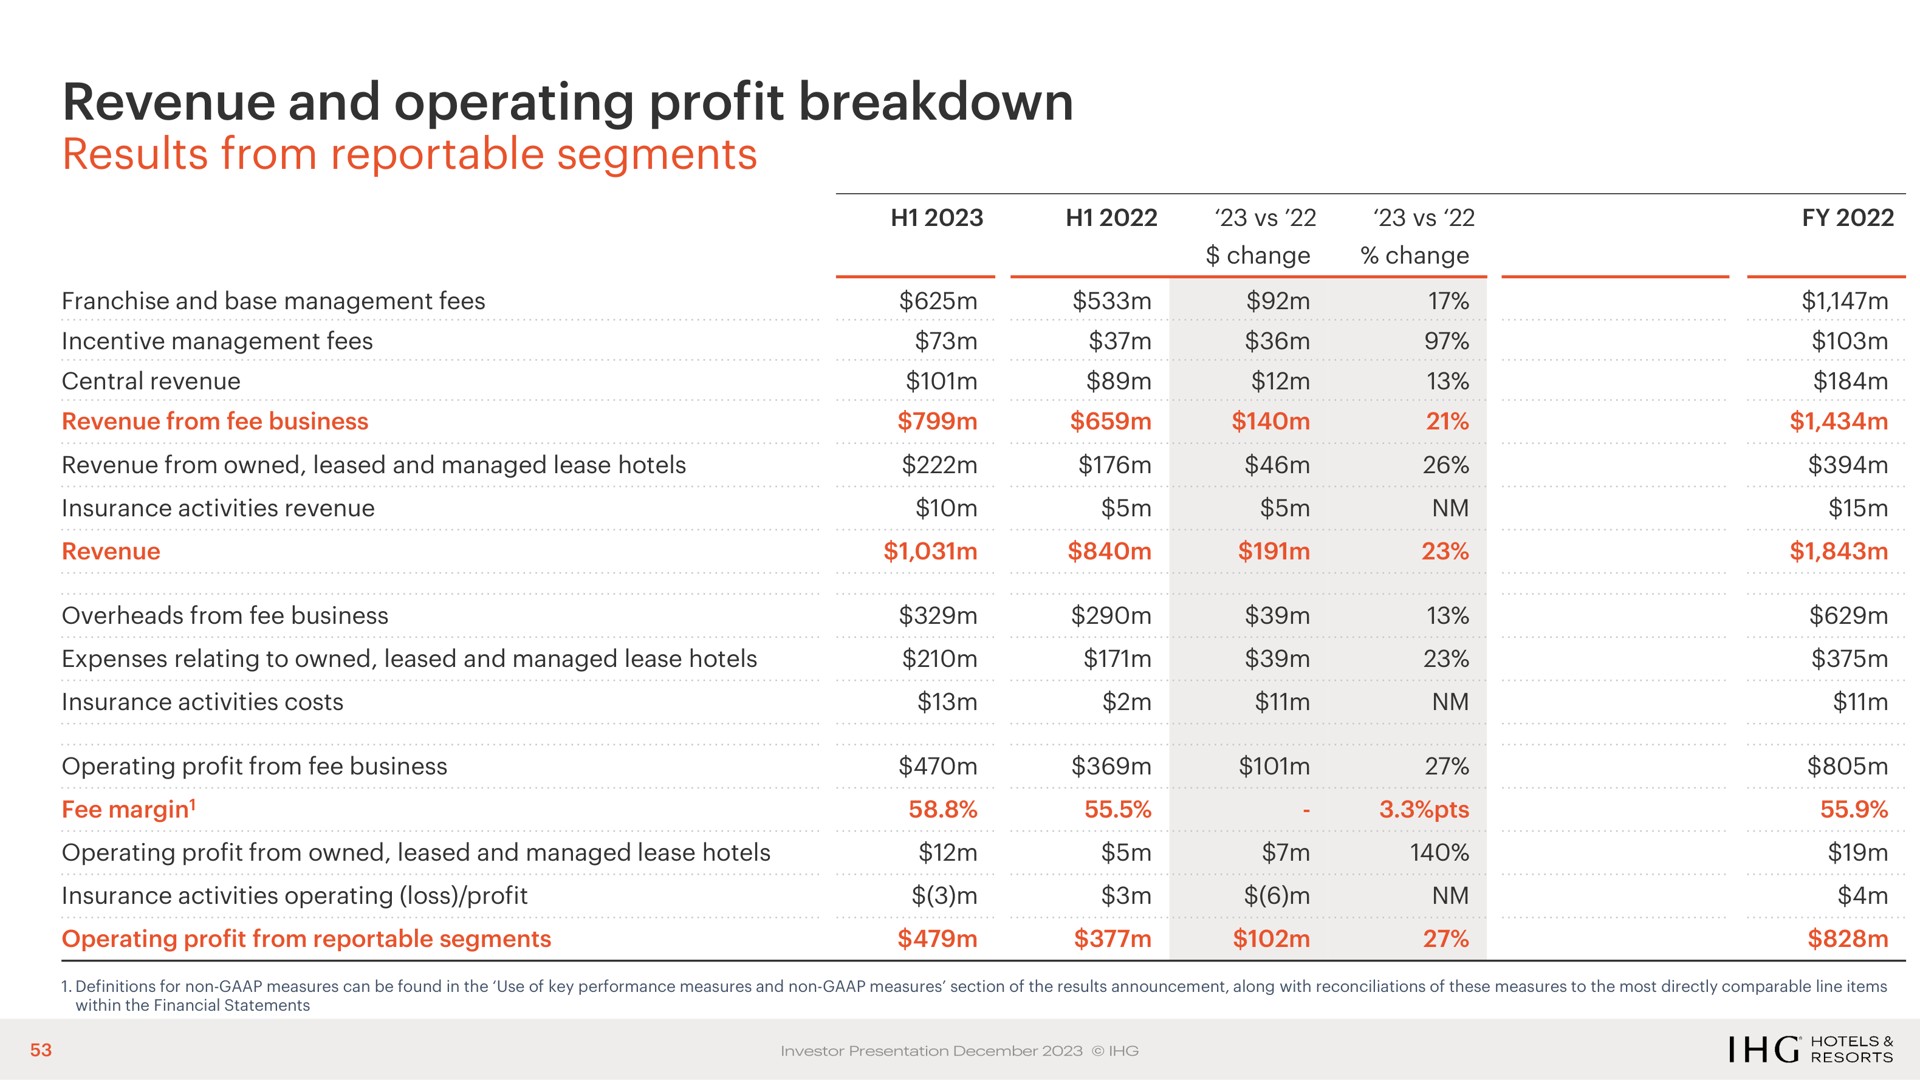 revenue and operating profit breakdown results from reportable segments | IHG Hotels